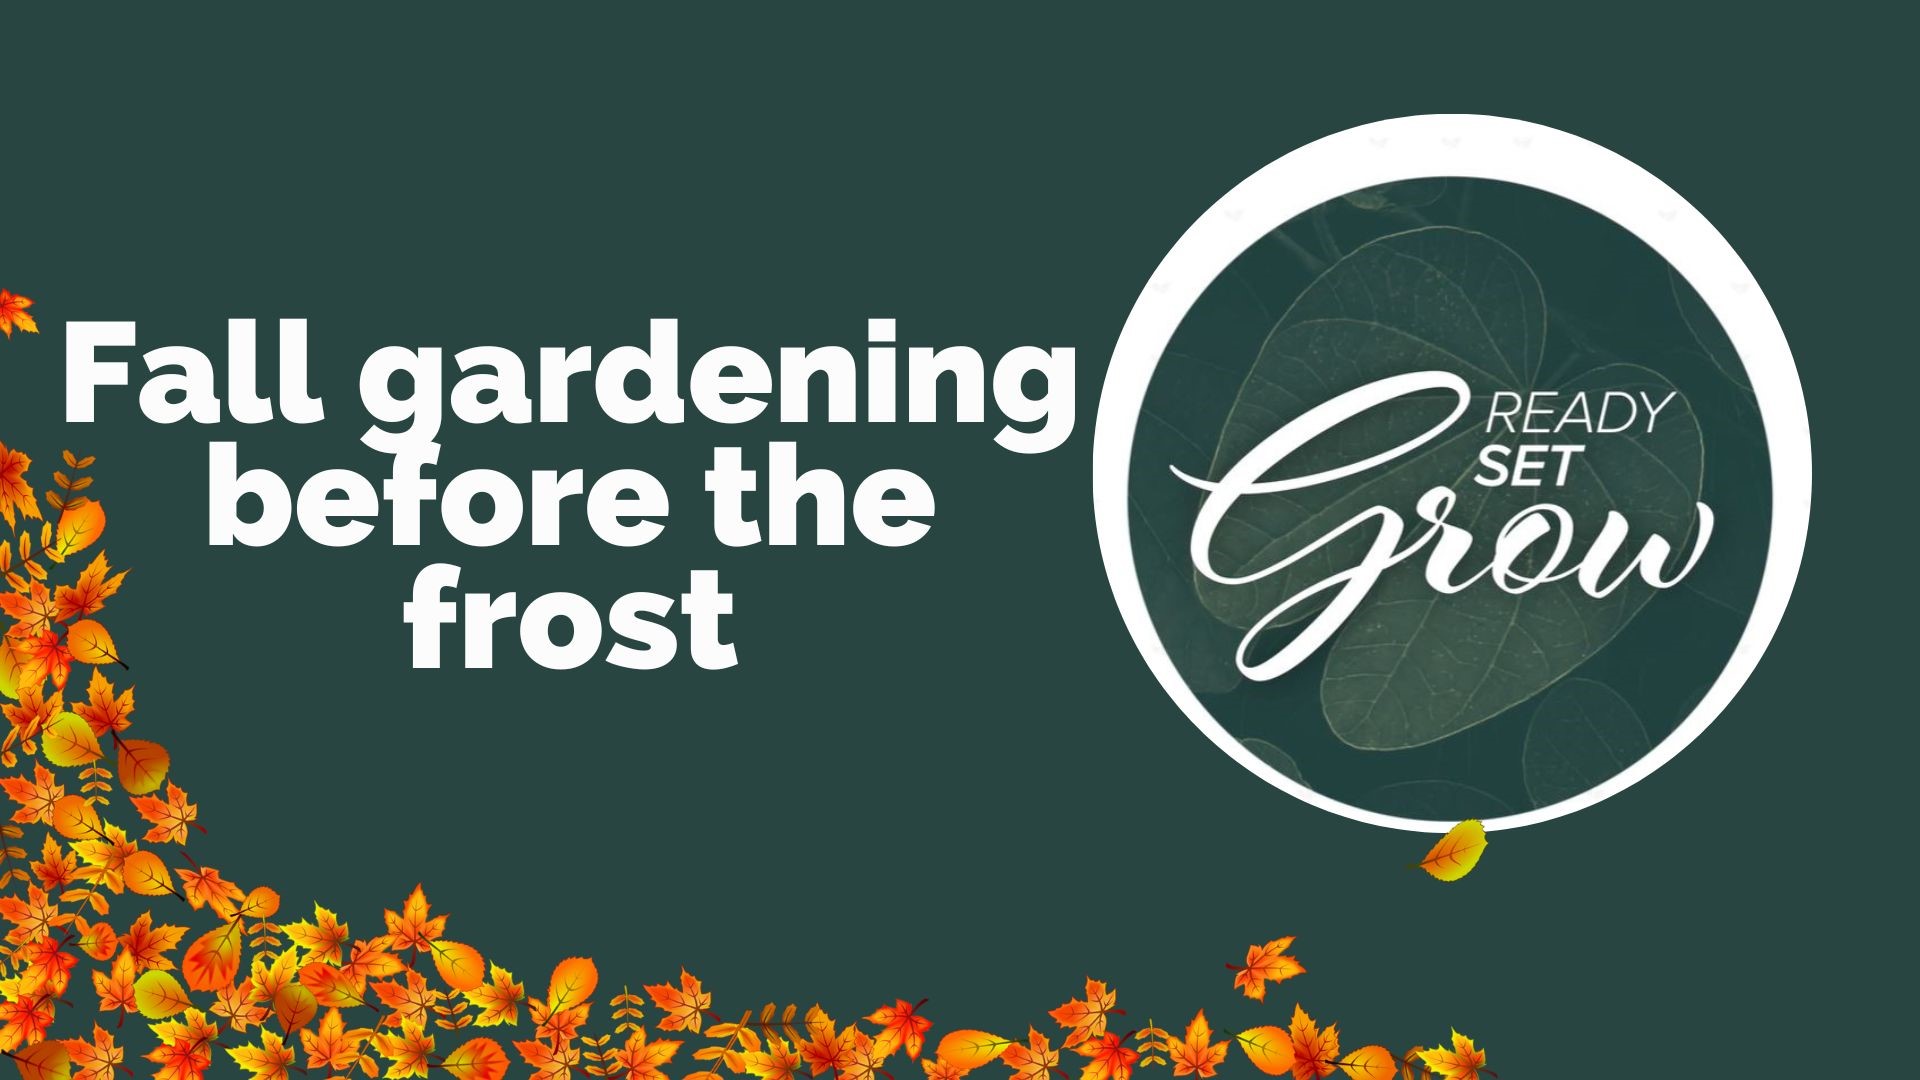 How to prepare your gardens and plants for the cold and frost, as well as tips to cleaning up leaves from yards and the science behind fall foliage.